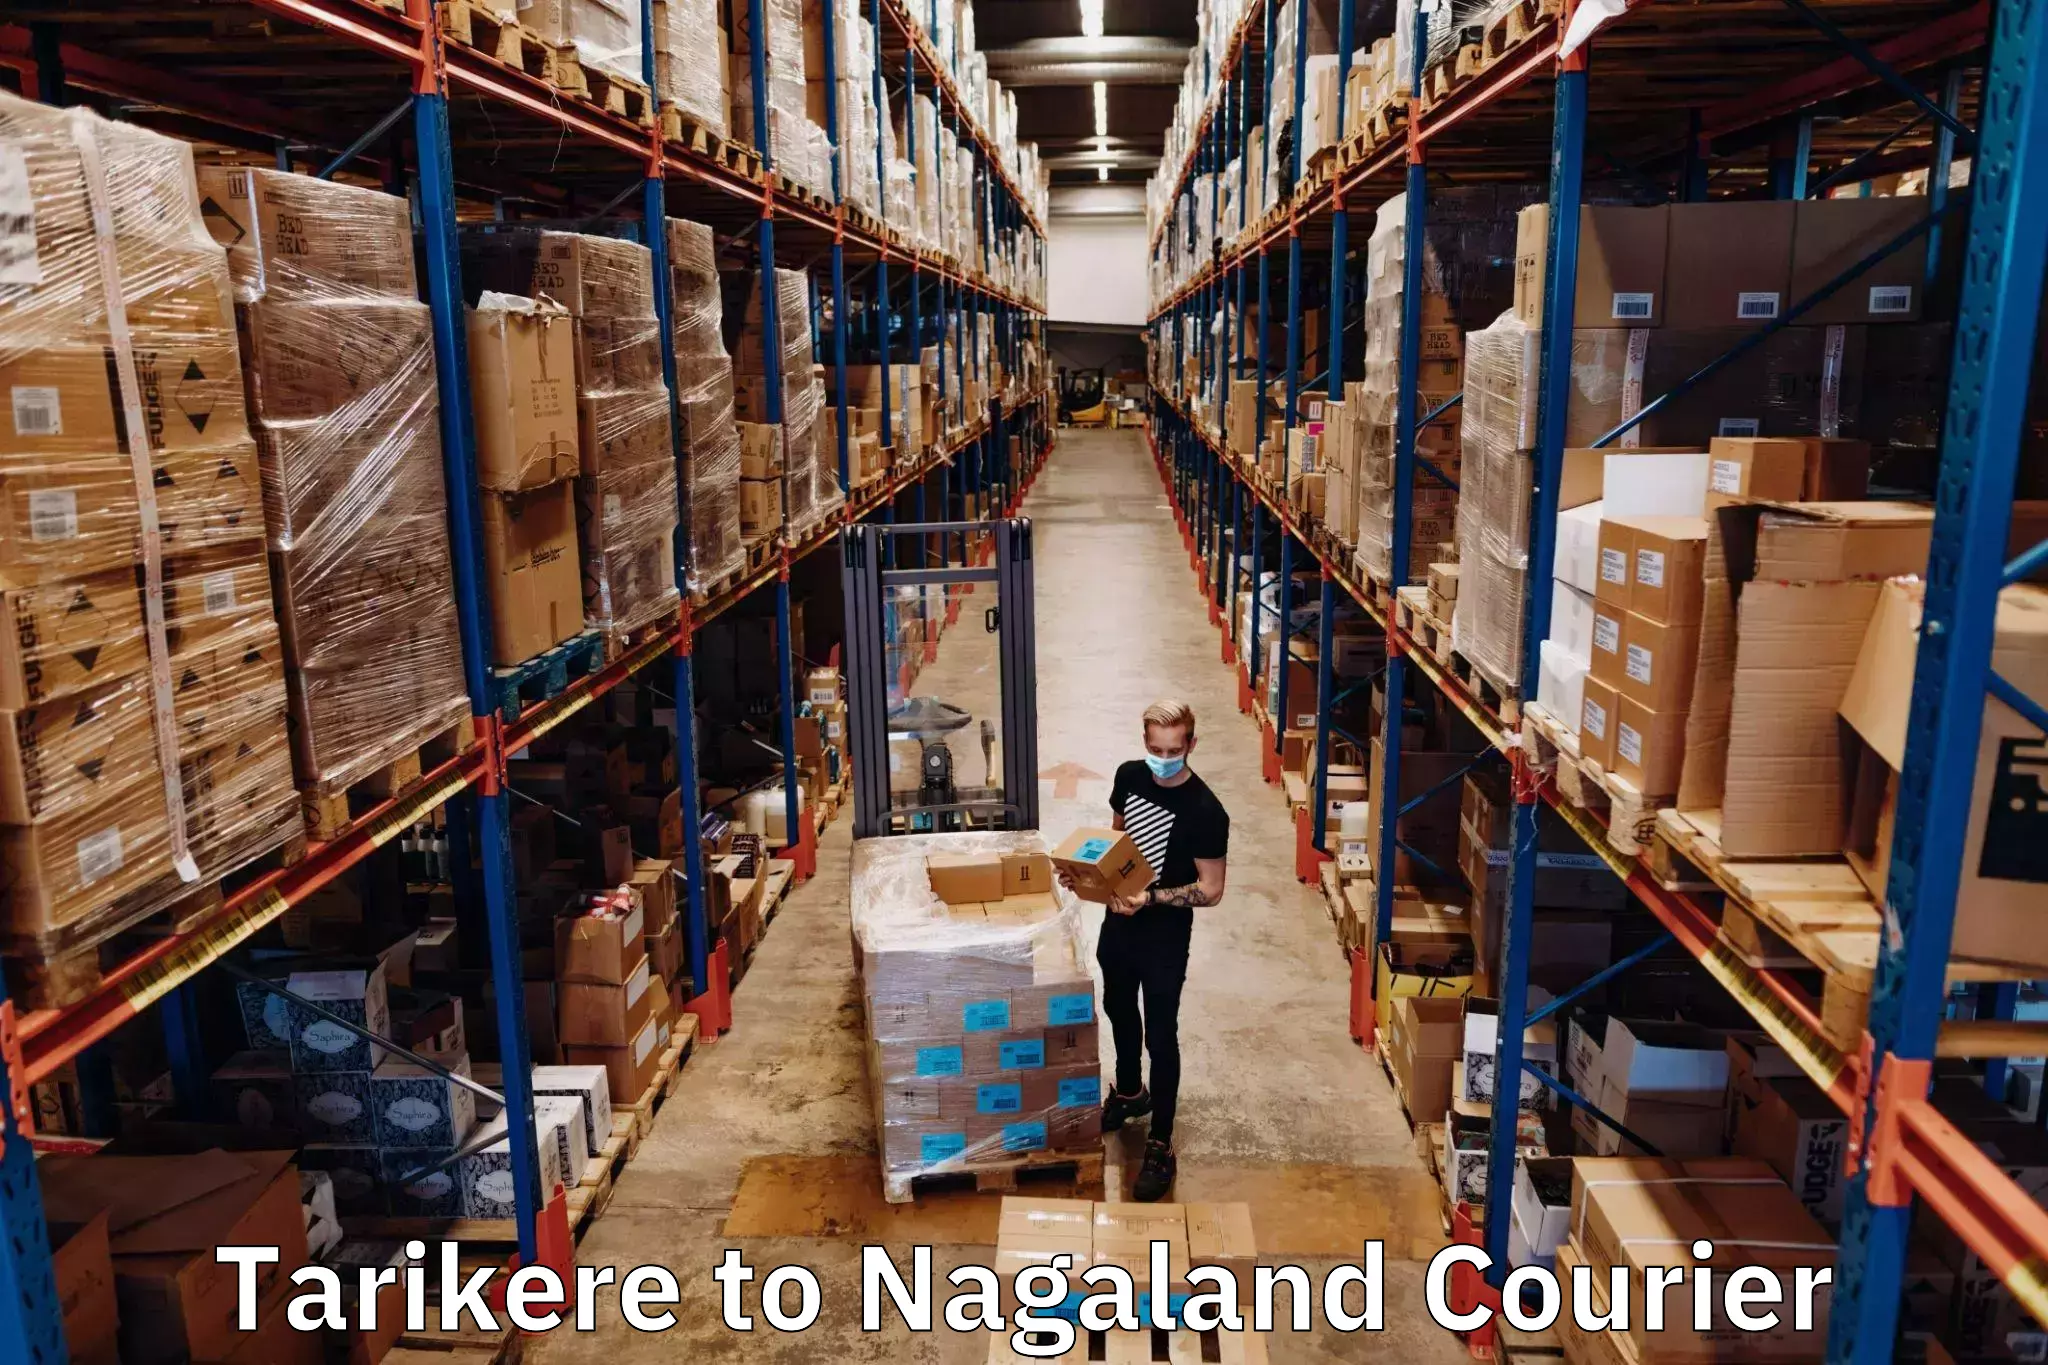 Multi-service courier options Tarikere to Nagaland